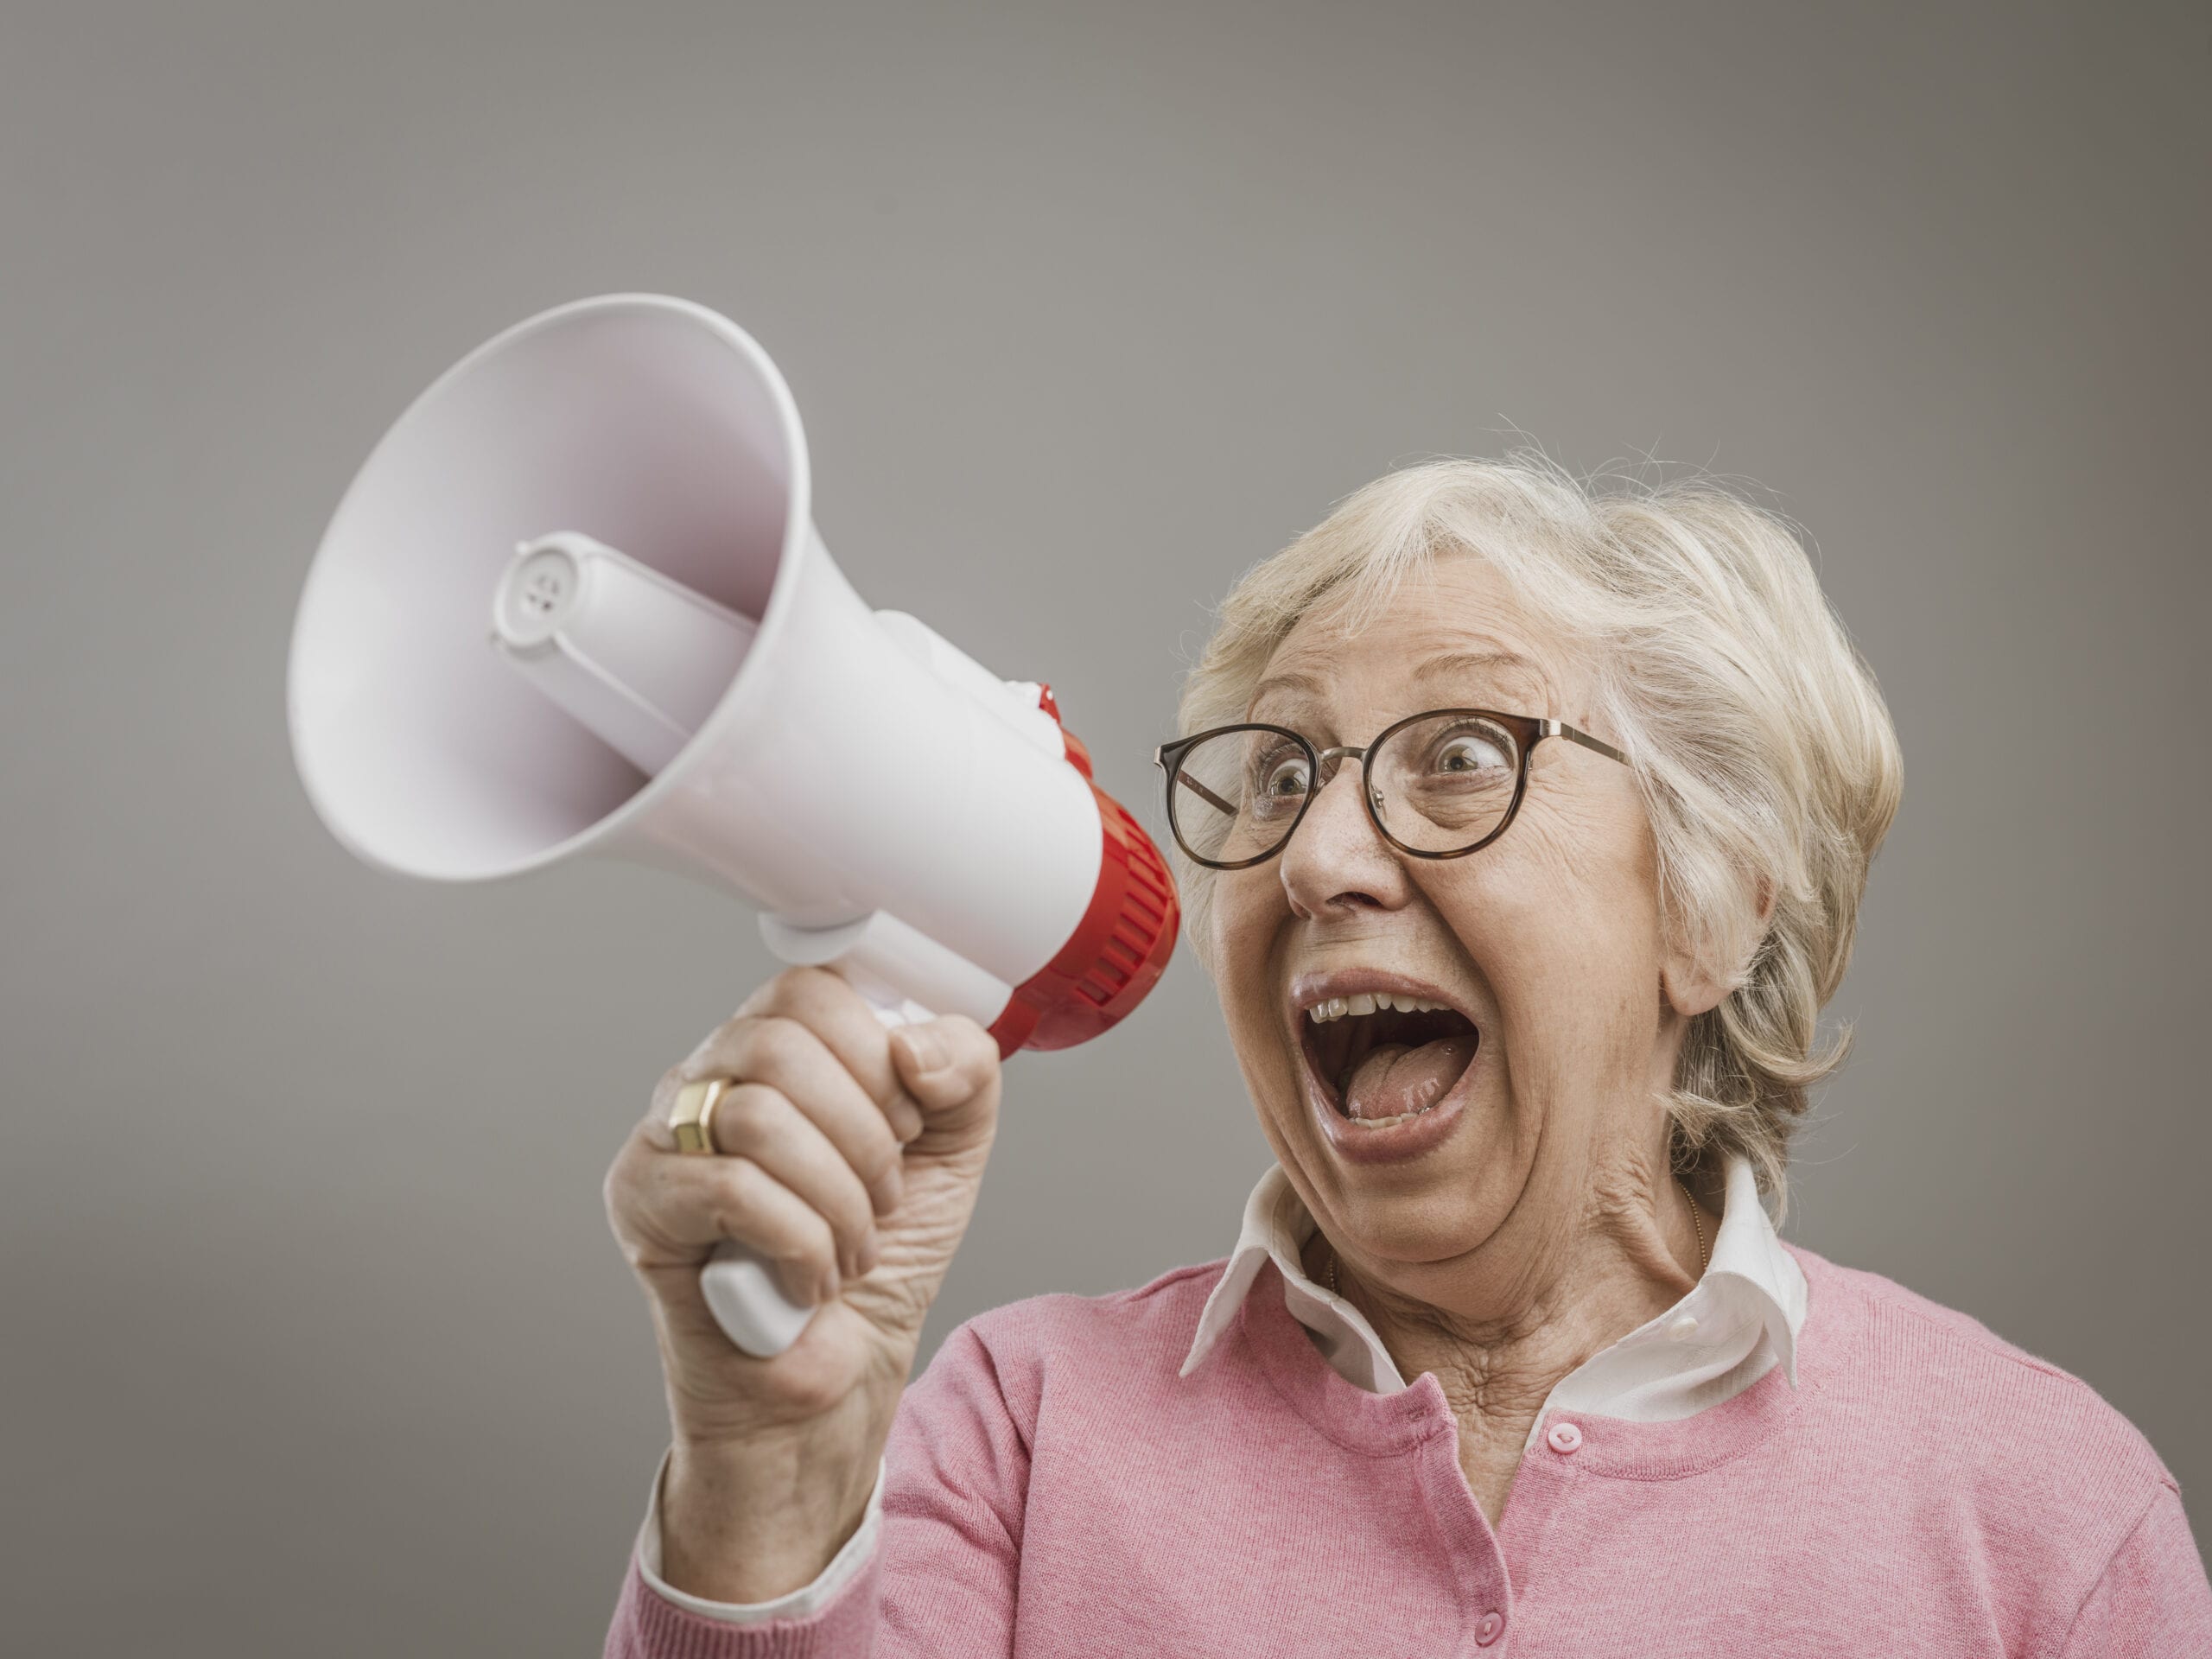 Cheerful senior lady shouting into a megaphone